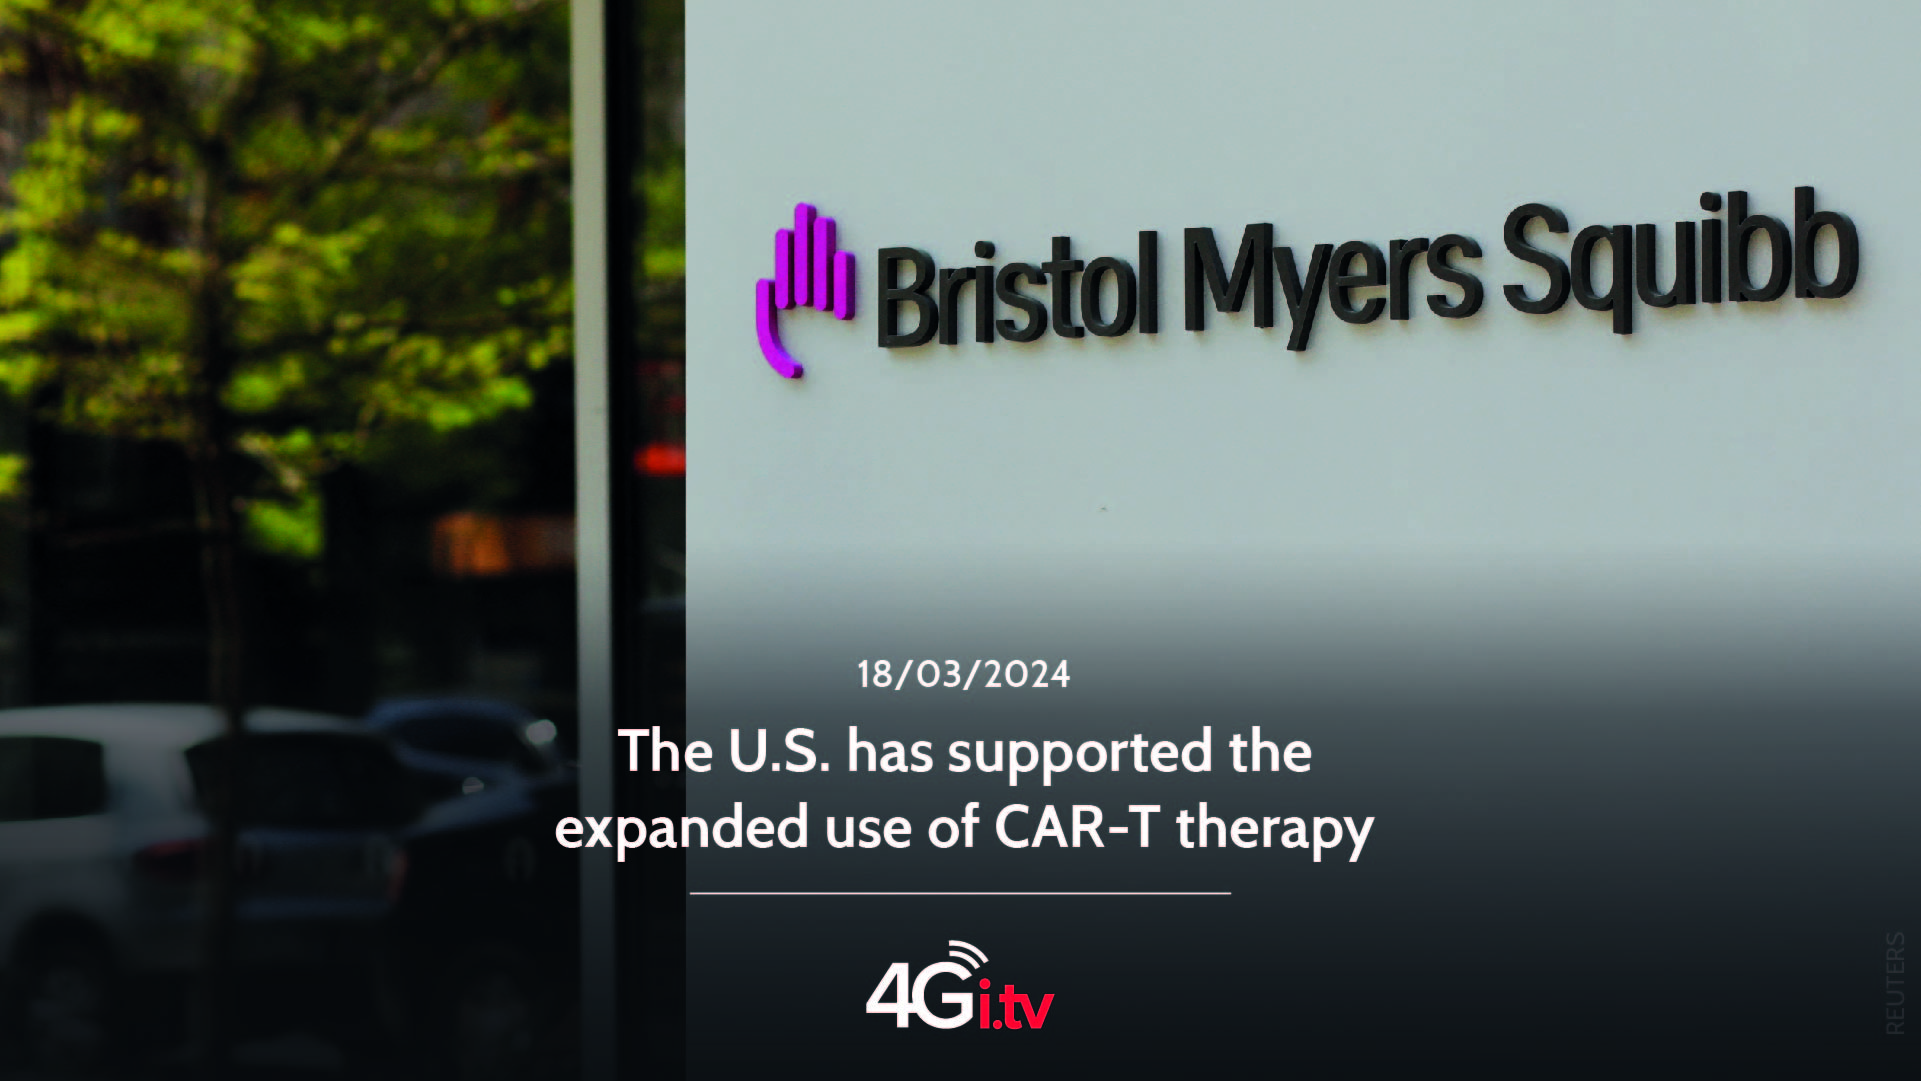 Lesen Sie mehr über den Artikel The U.S. has supported the expanded use of CAR-T therapy